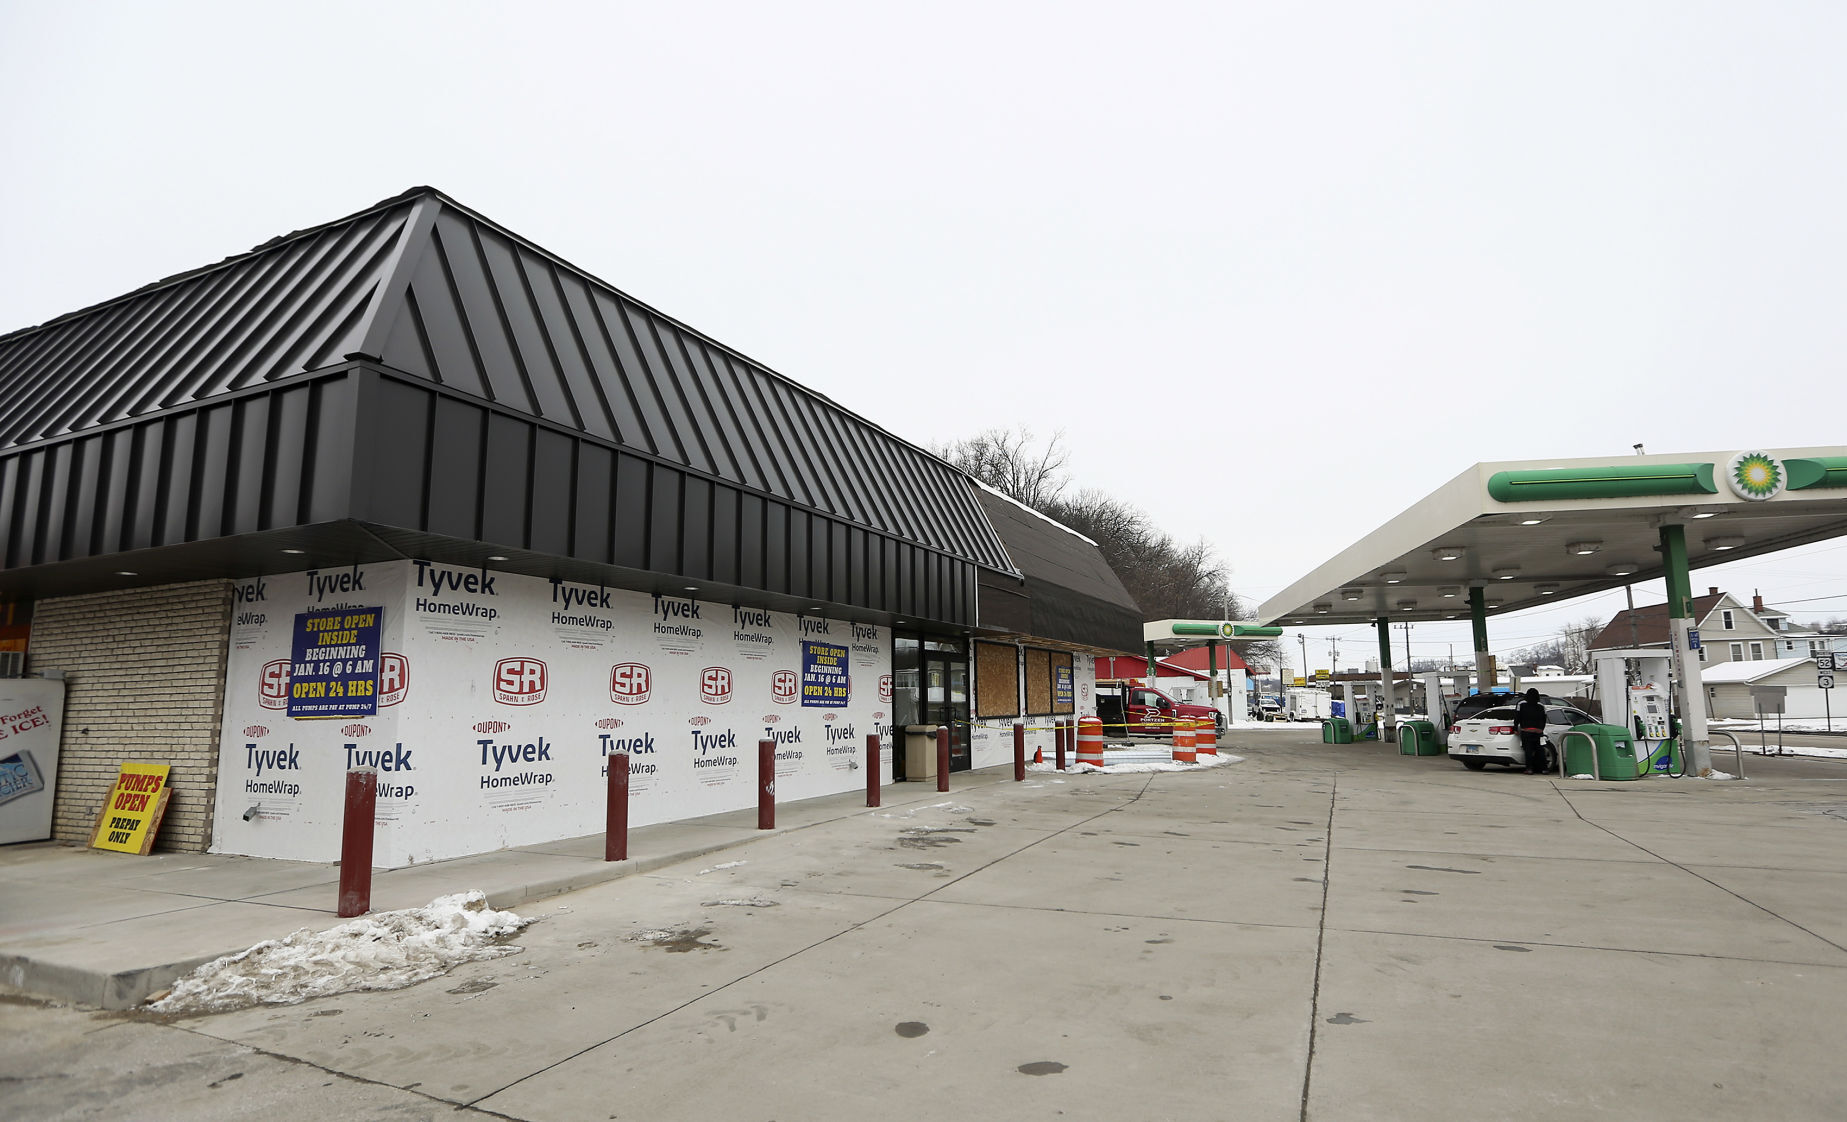 Family Mart, at 32nd Street and Central Avenue in Dubuque, is open while undergoing a renovation. PHOTO CREDIT: NICKI KOHL